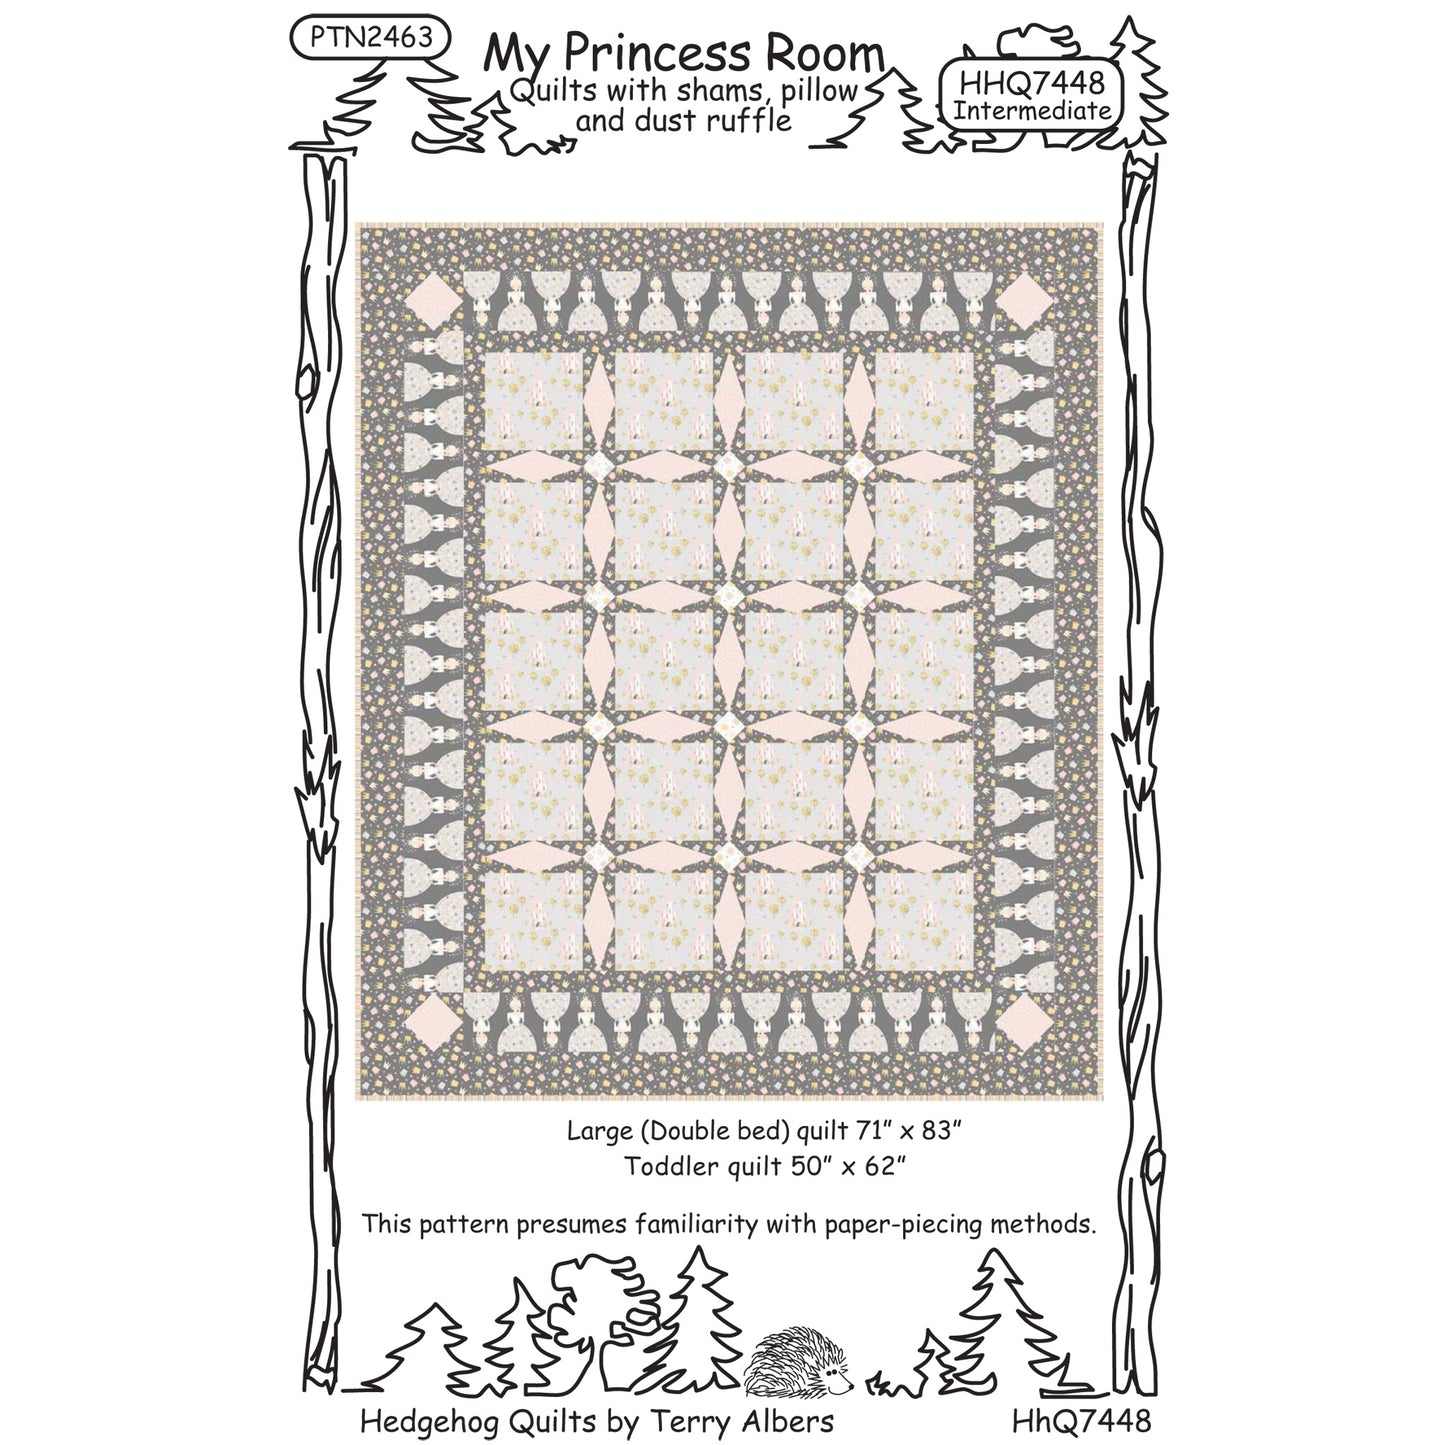 Cover image of pattern for My Princess Room Quilts with shams, pillow and dust ruffle.